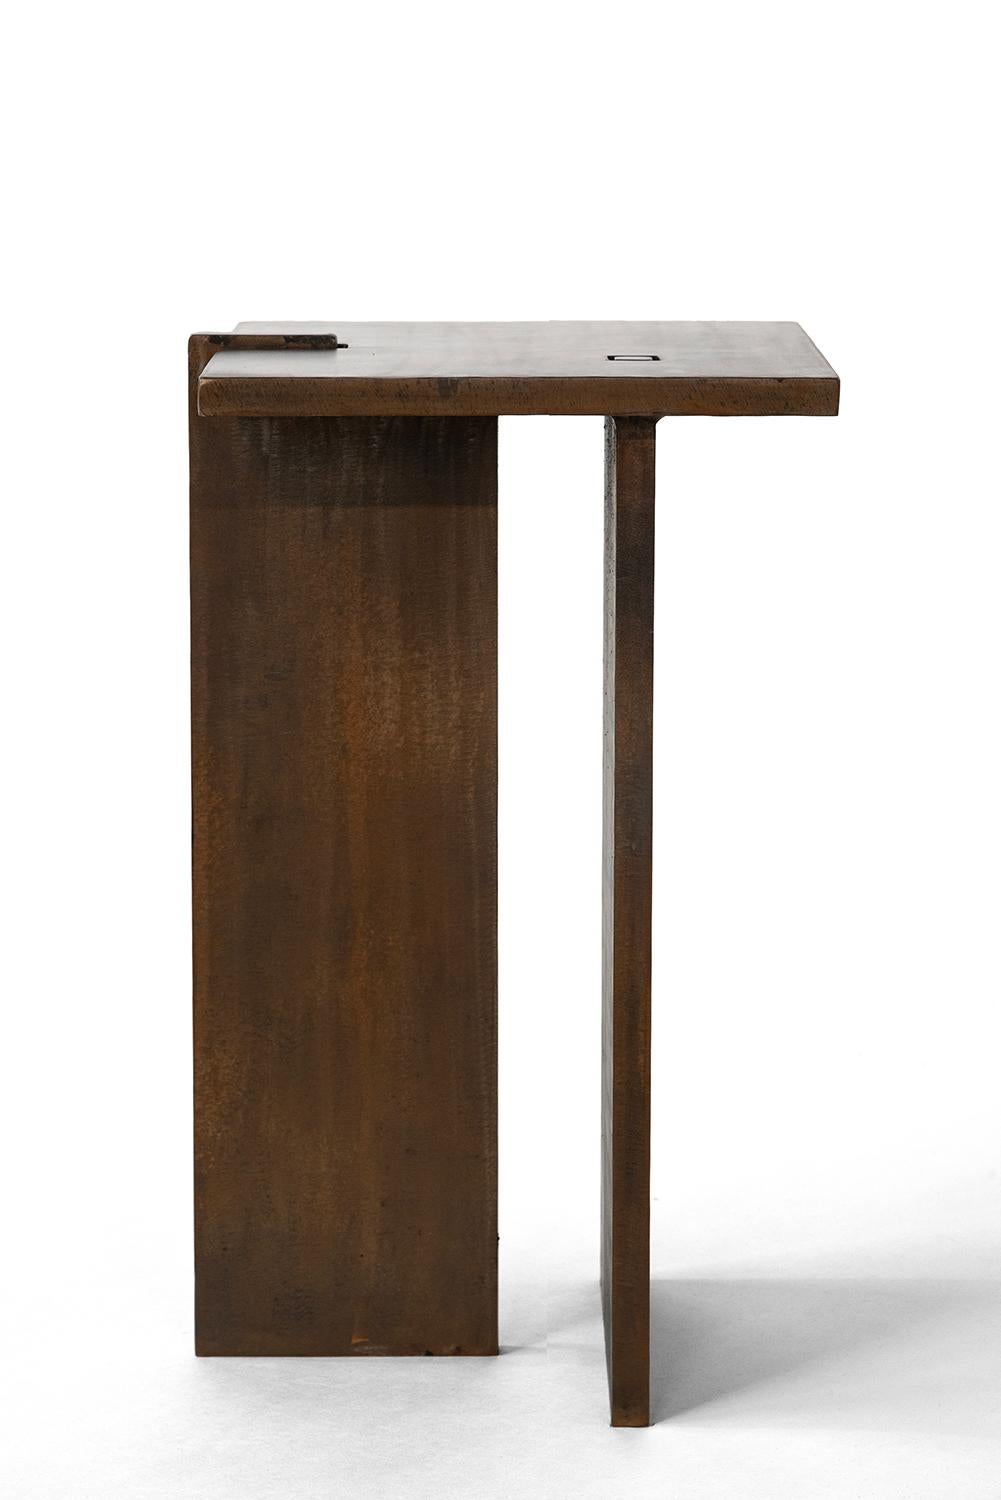 TABLE NO. 8 - SQUARE
J.M. Szymanski
d. 2023

A perfectly simple side table. Solid 3/4” steel components are combined to make a dynamic form. Featured in bronze steel finish.

Custom sizes available. Made in the Bronx, New York, USA.

Our products